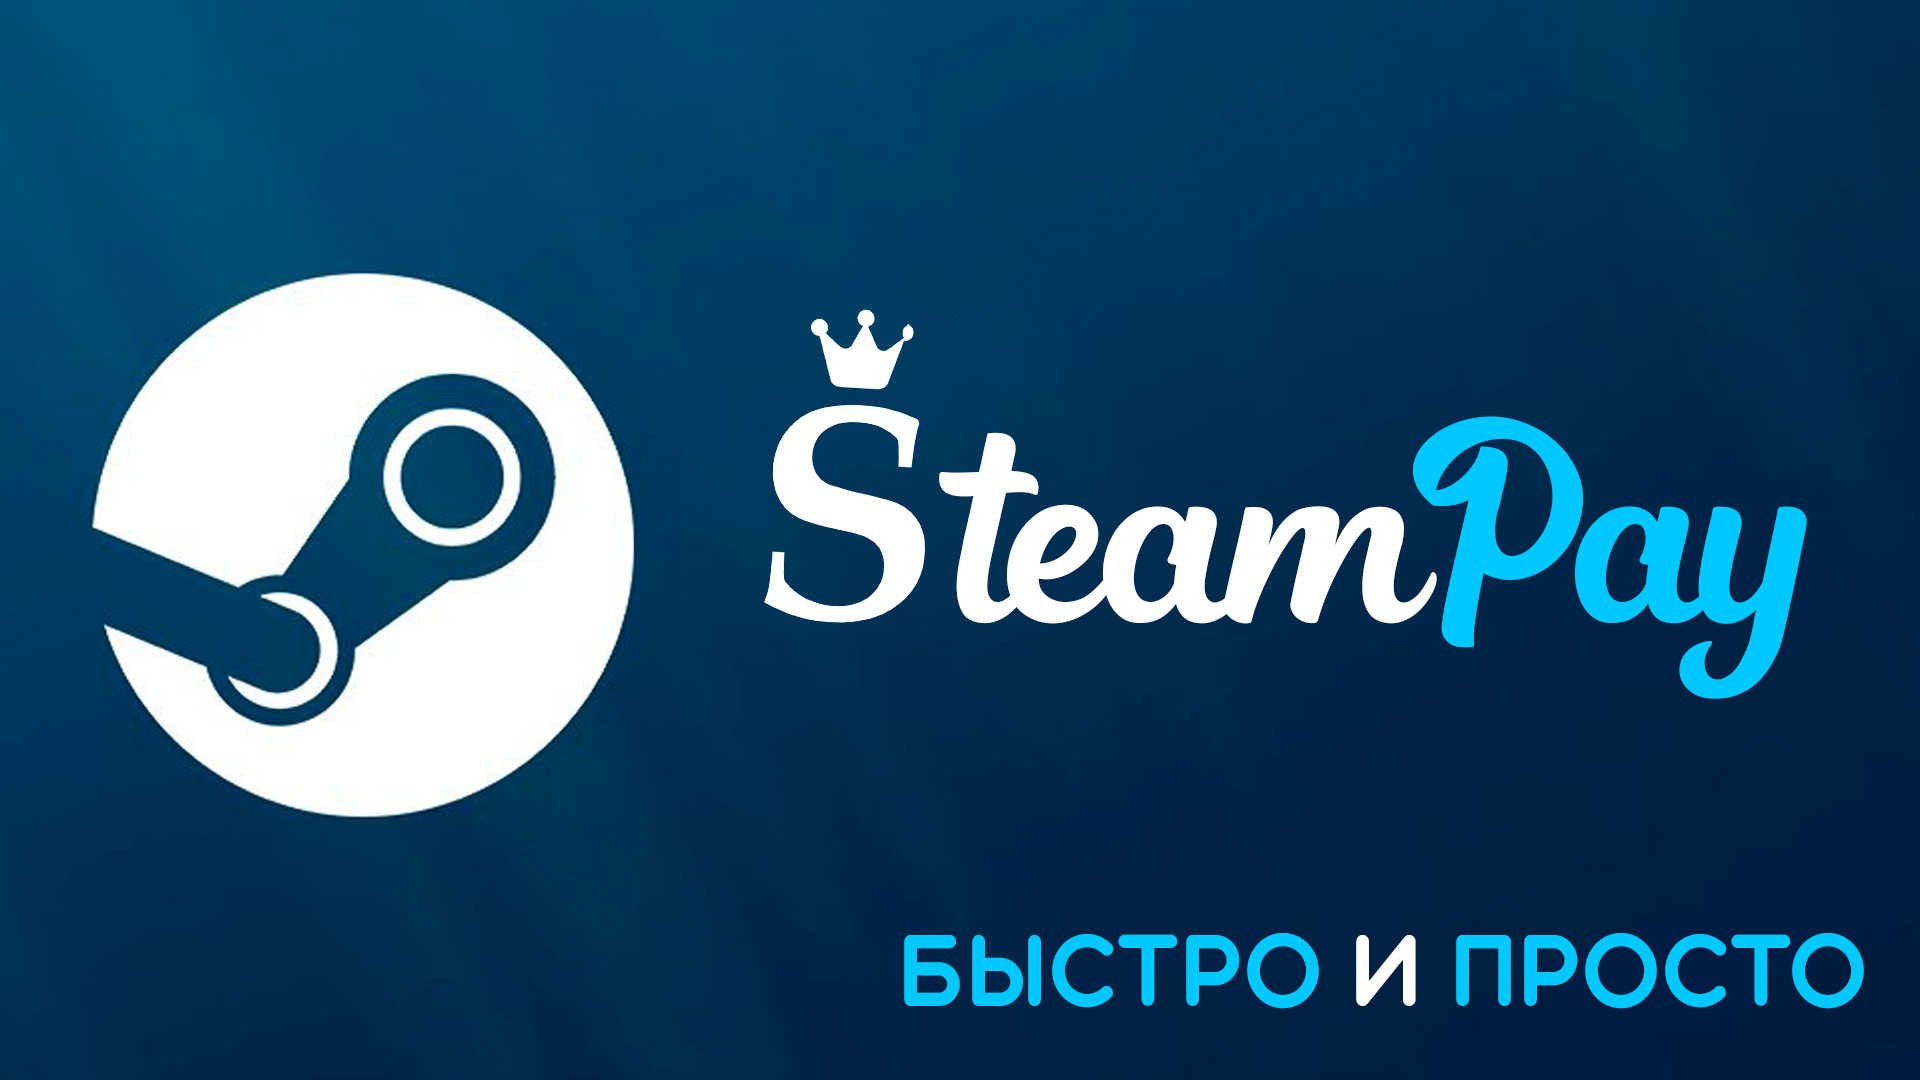 Mog station steam payment фото 43